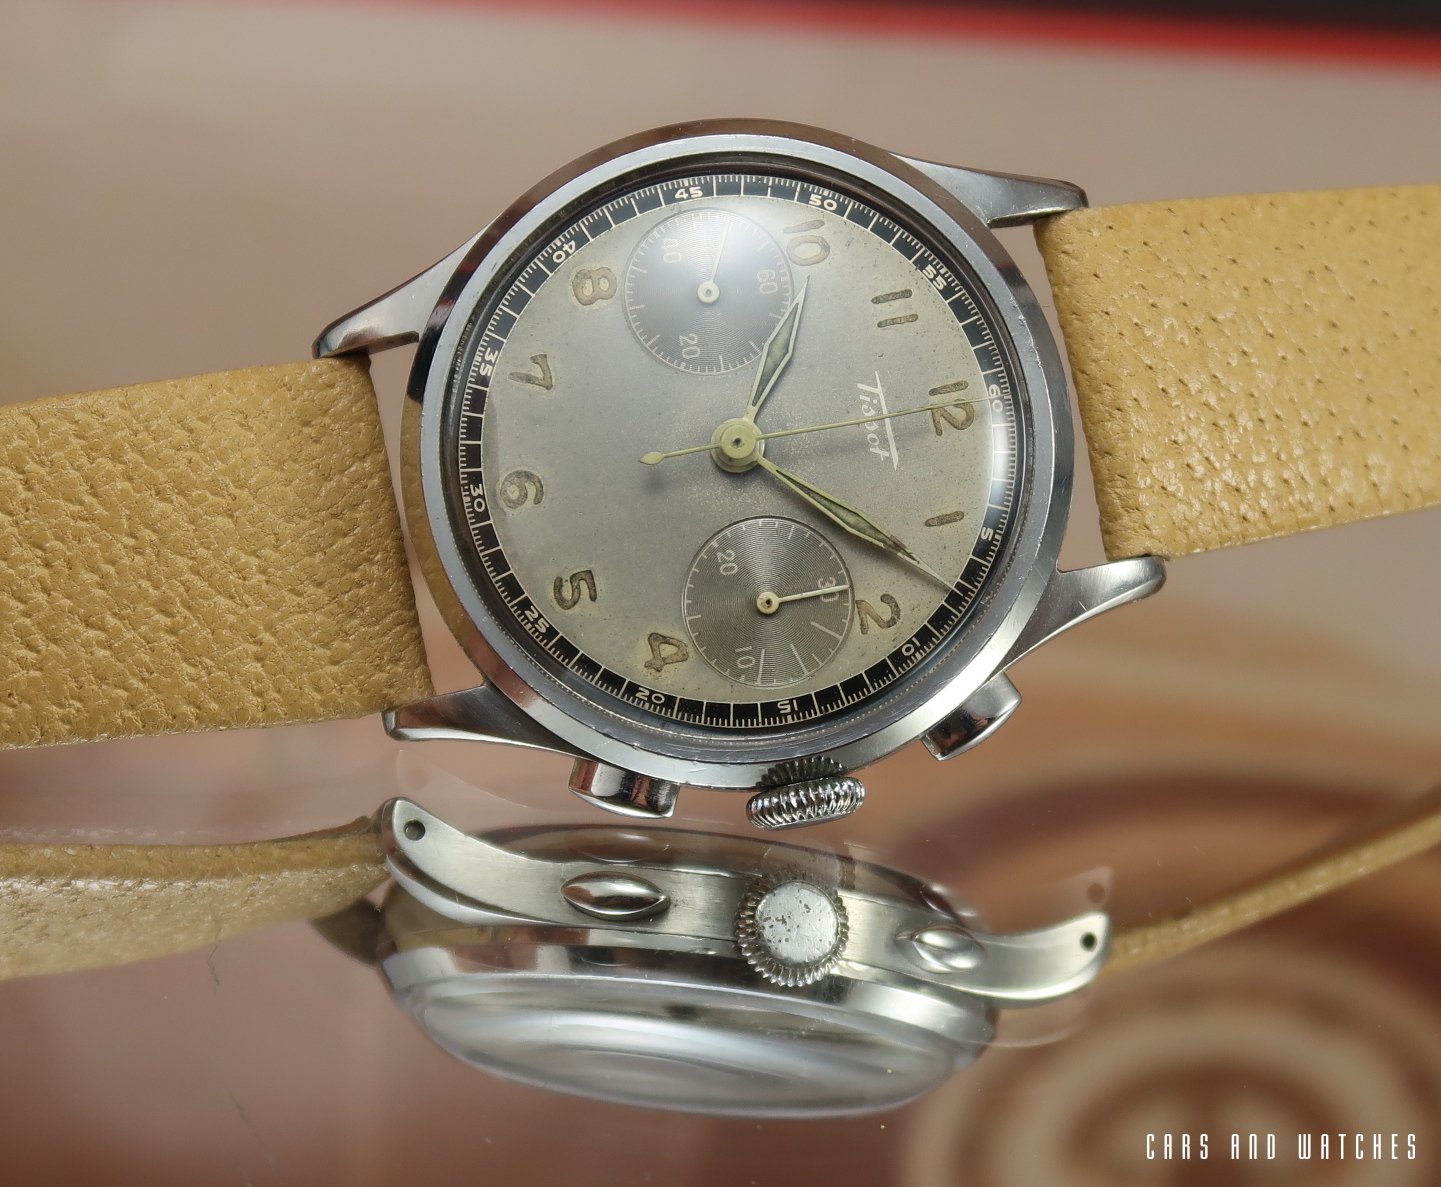 Tissot 15TL with Rare Military Radium Dial | Watches | Cars and Watches